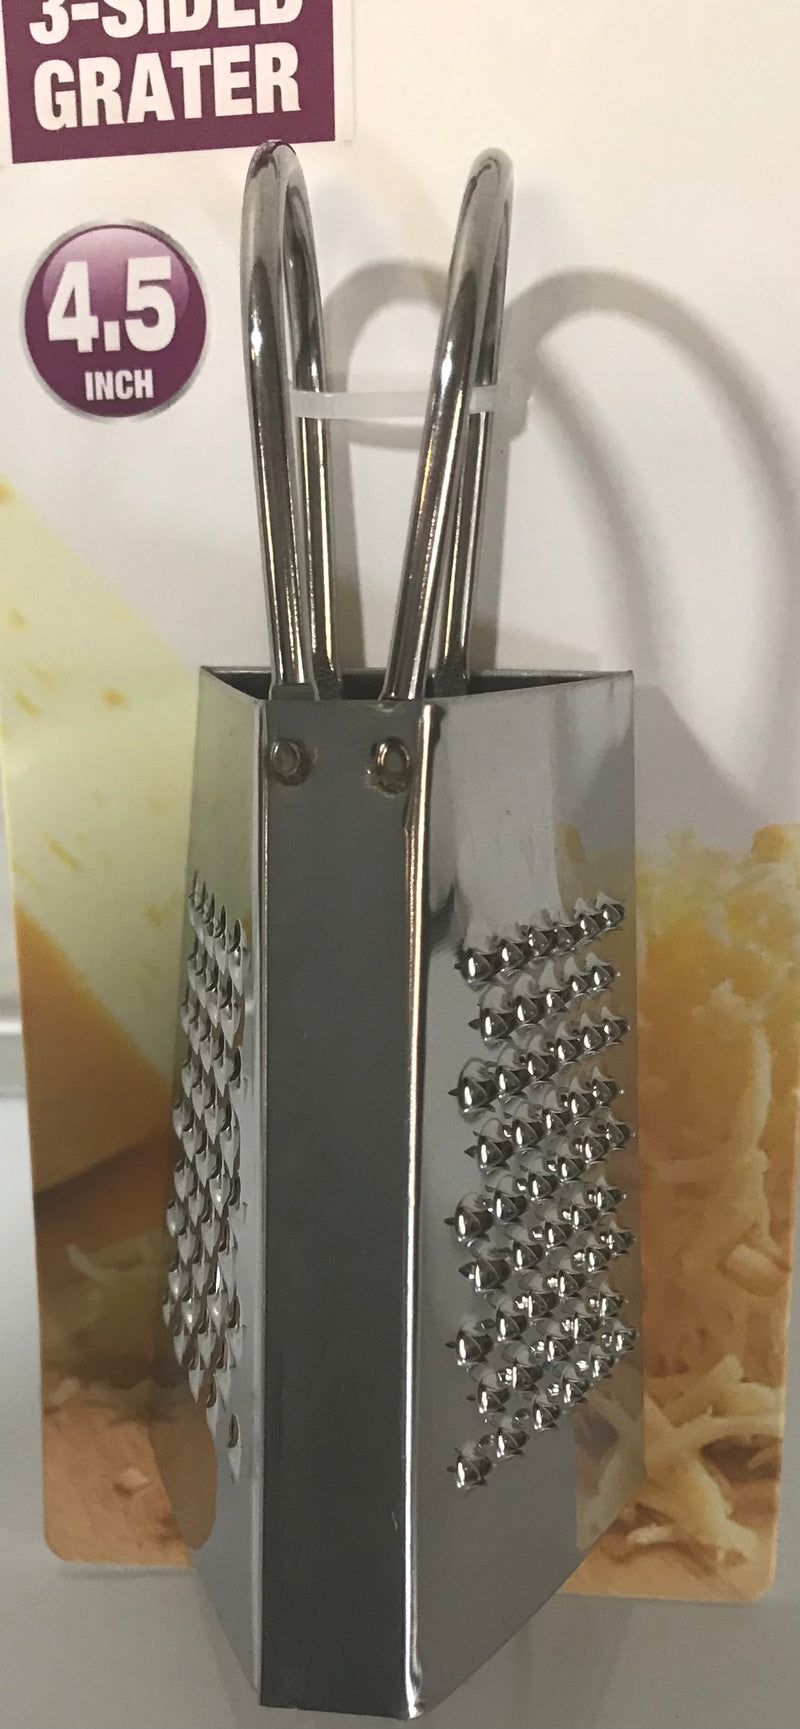 Small grater - 3 sided - 4.5 inch